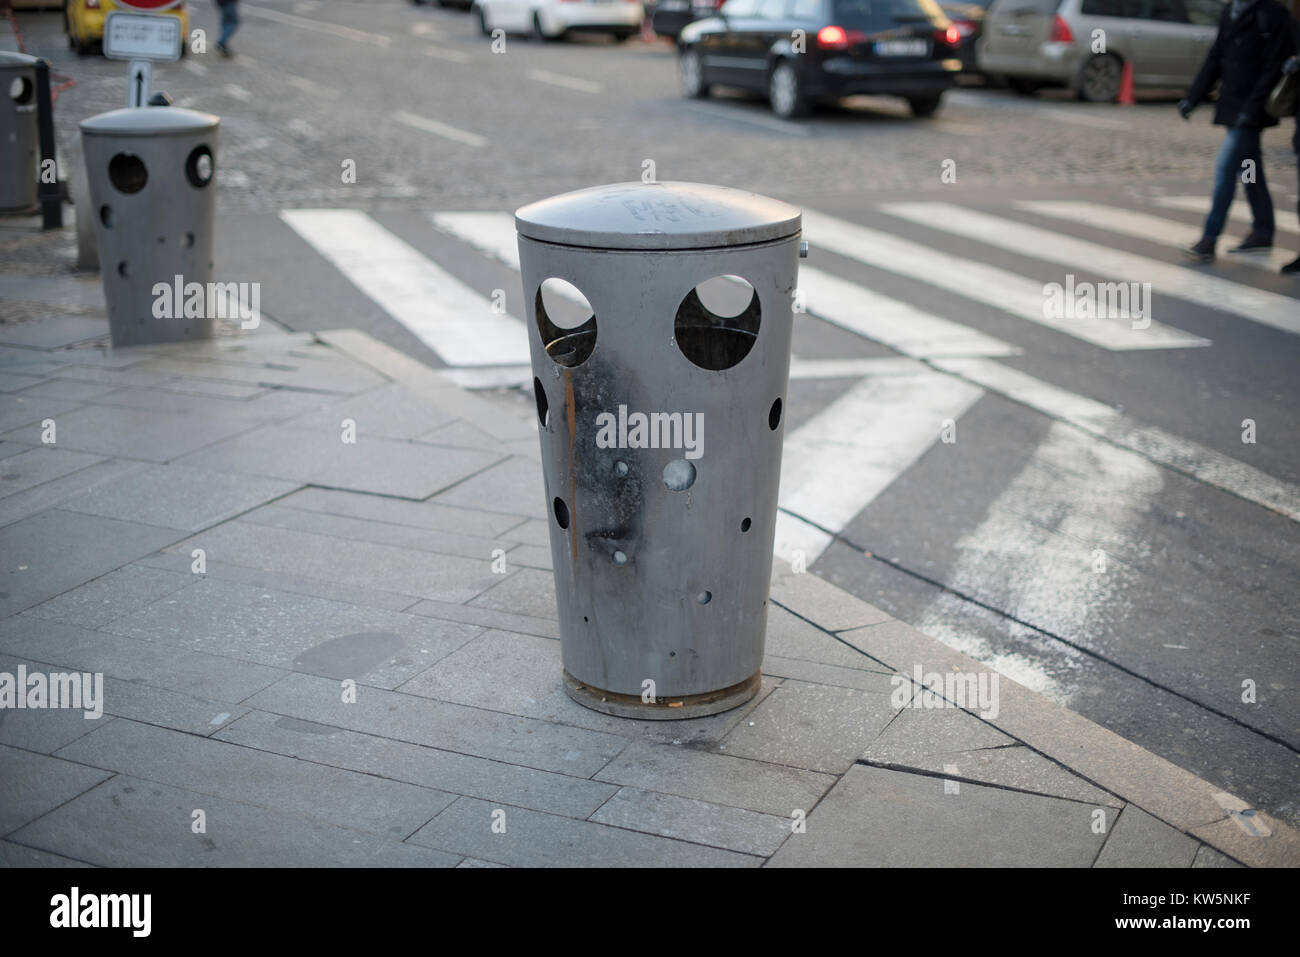 https://c8.alamy.com/comp/KW5NKF/a-metal-city-bin-showing-signs-of-burn-with-a-road-and-a-zebra-crossing-KW5NKF.jpg